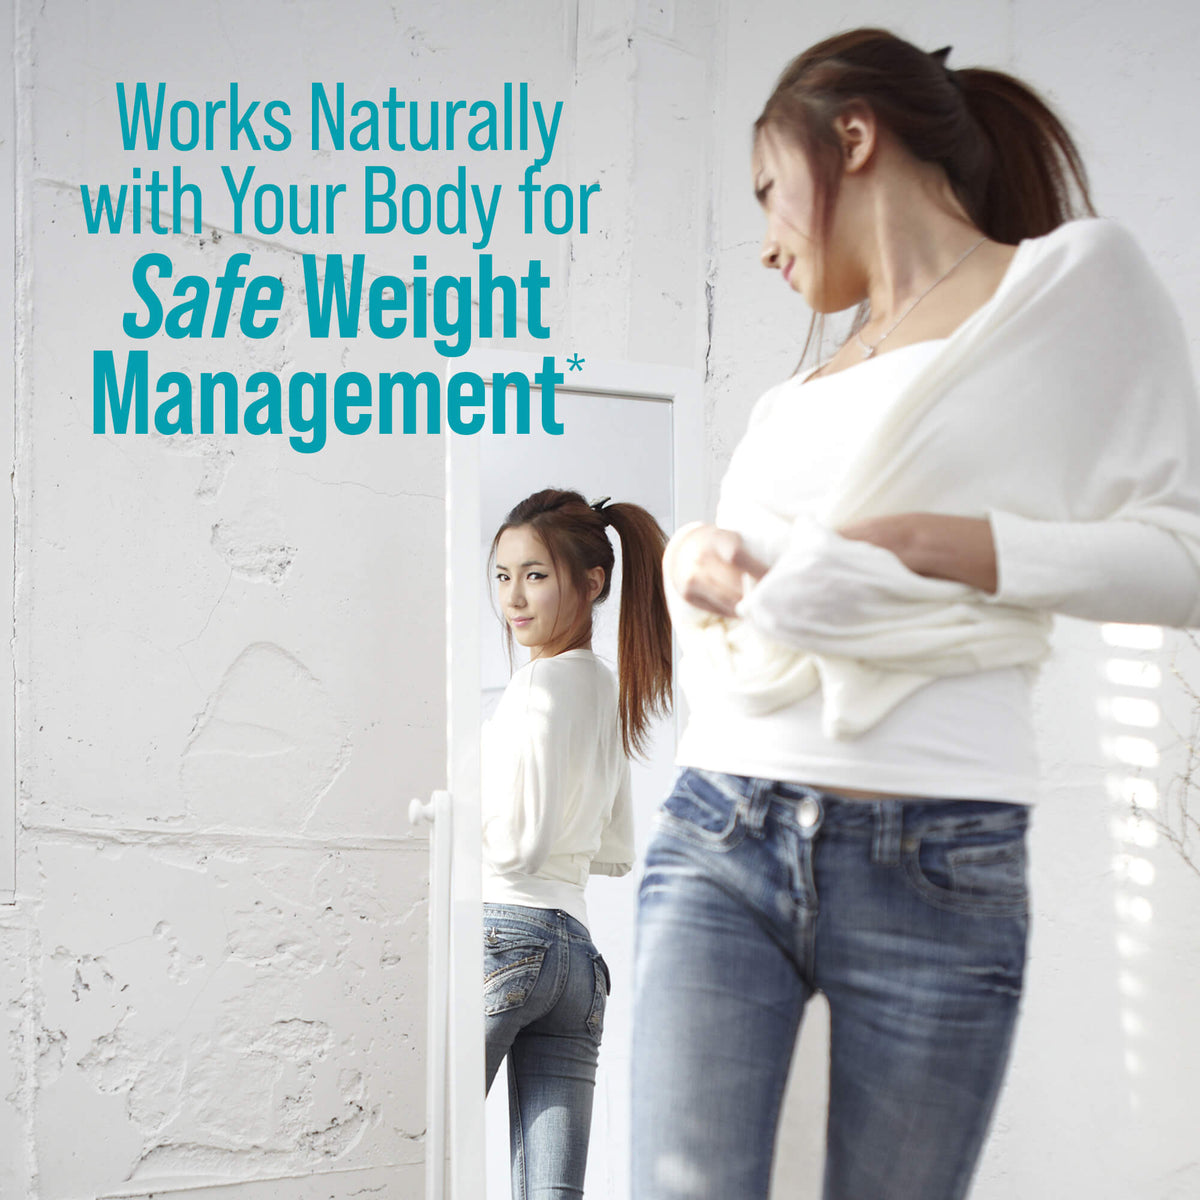 works naturally with your body for safe weight management written next to woman looking in the mirror.